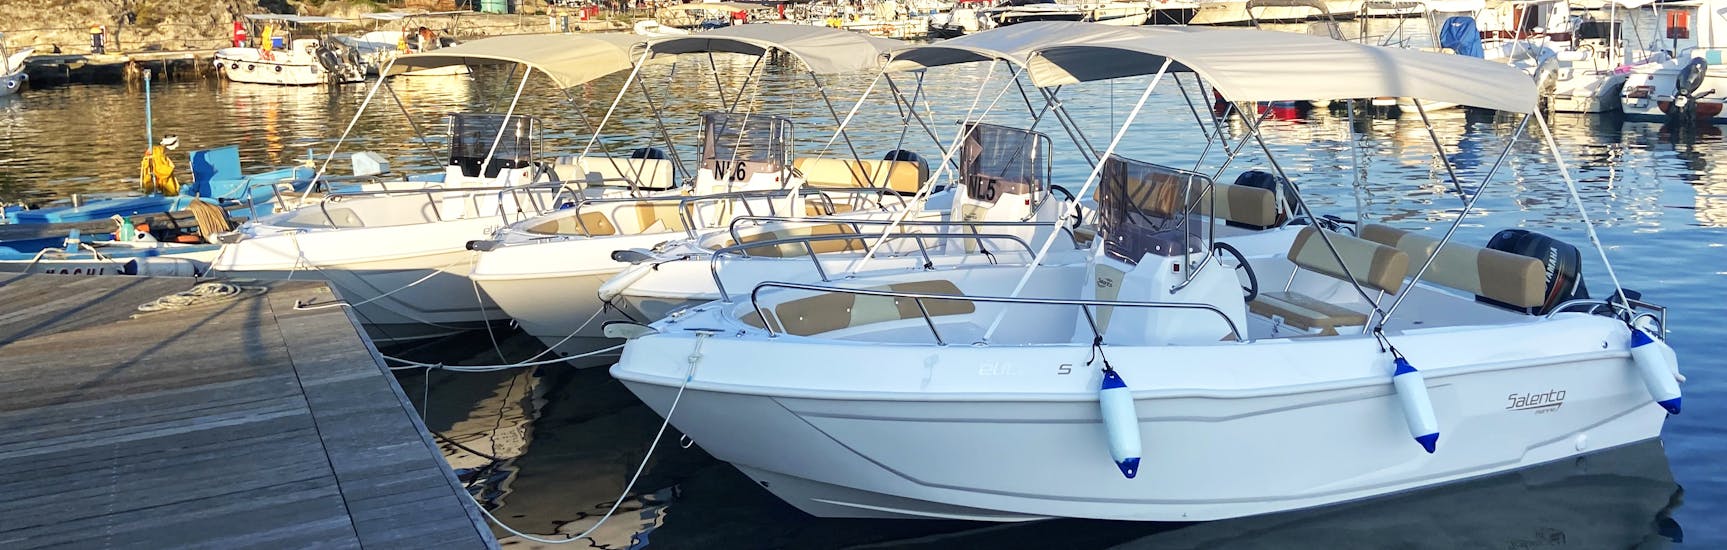 The boat used by Nautica Marilor fo the Boat Rental in Santa Maria di Leuca (up to 8 people).